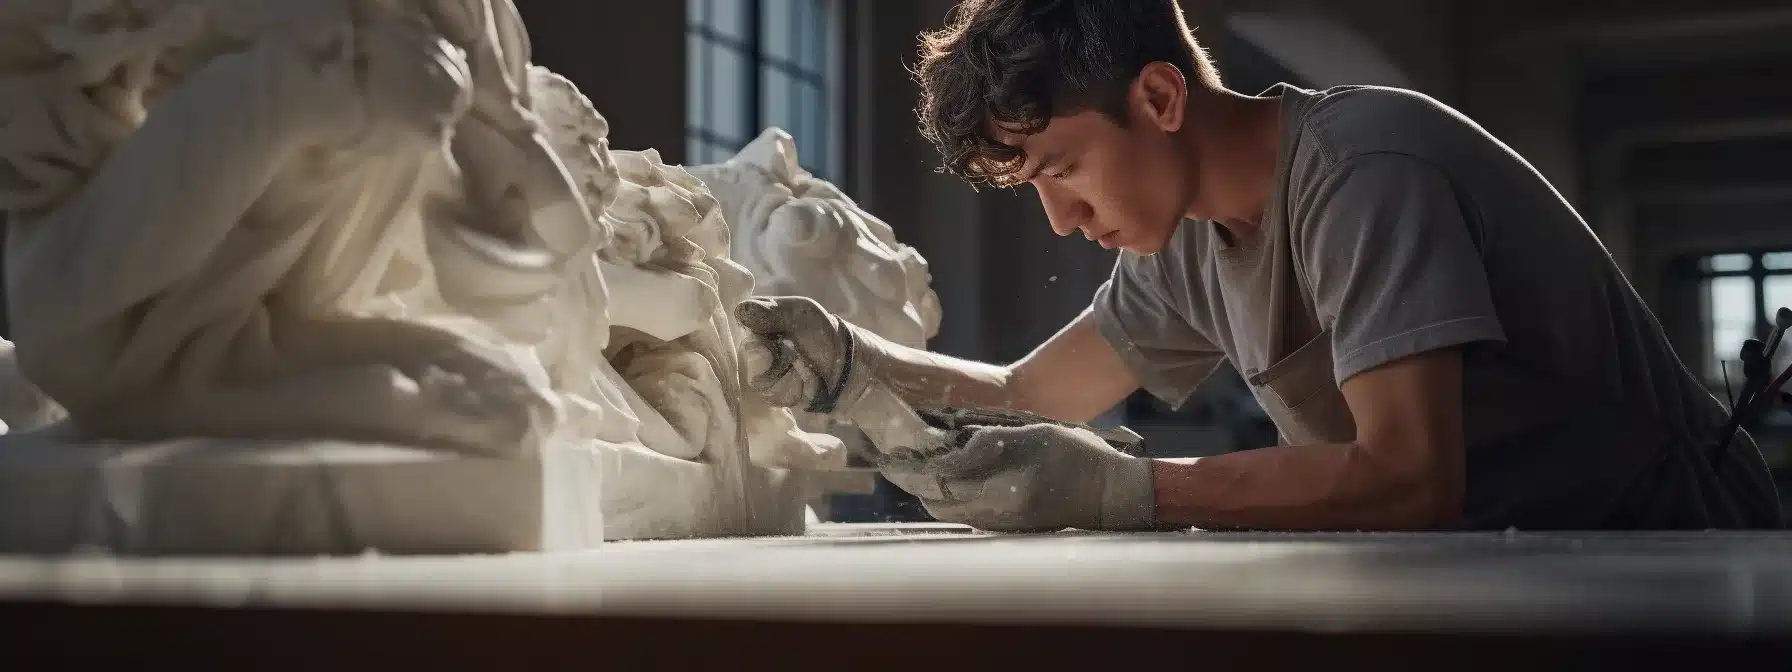 A Sculptor Chipping Away At A Block Of Marble To Reveal A Hidden Intricate Statue.